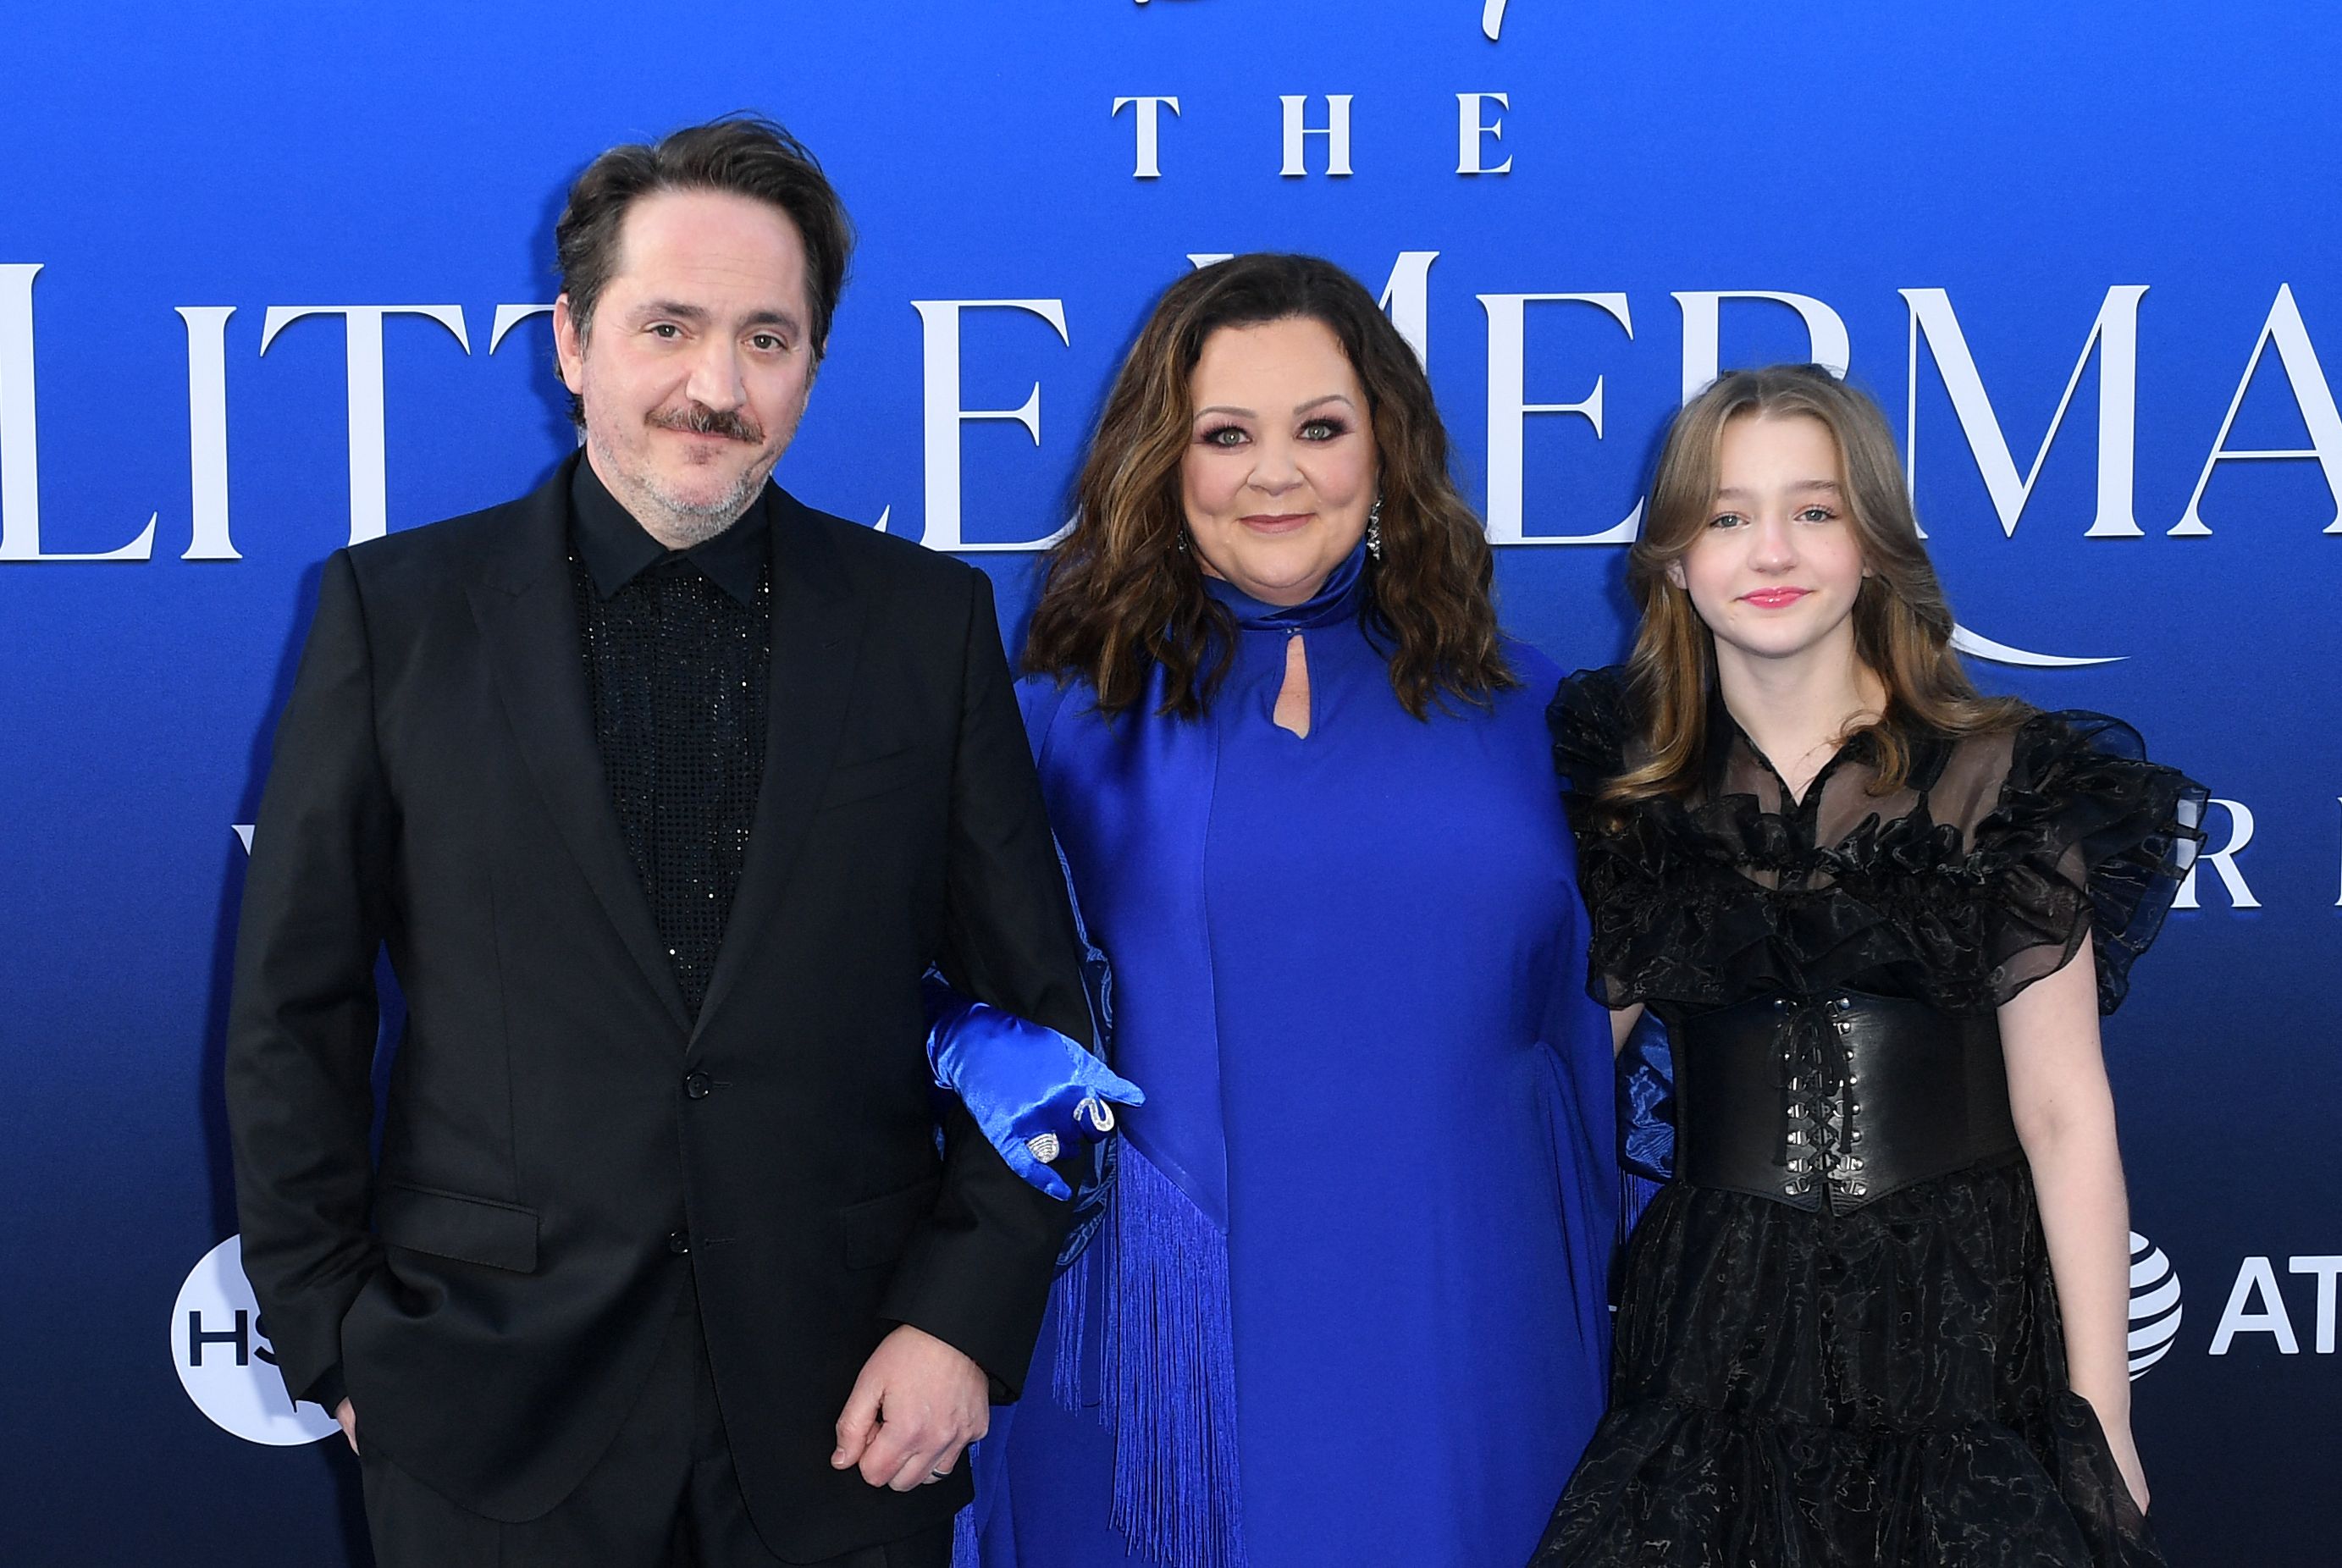 Melissa McCarthy (C) and their daughter arrive for the world premiere of Disney's "The Little Mermaid" at the Dolby Theatre in Hollywood, California, on May 8, 2023. | Source: Getty Images